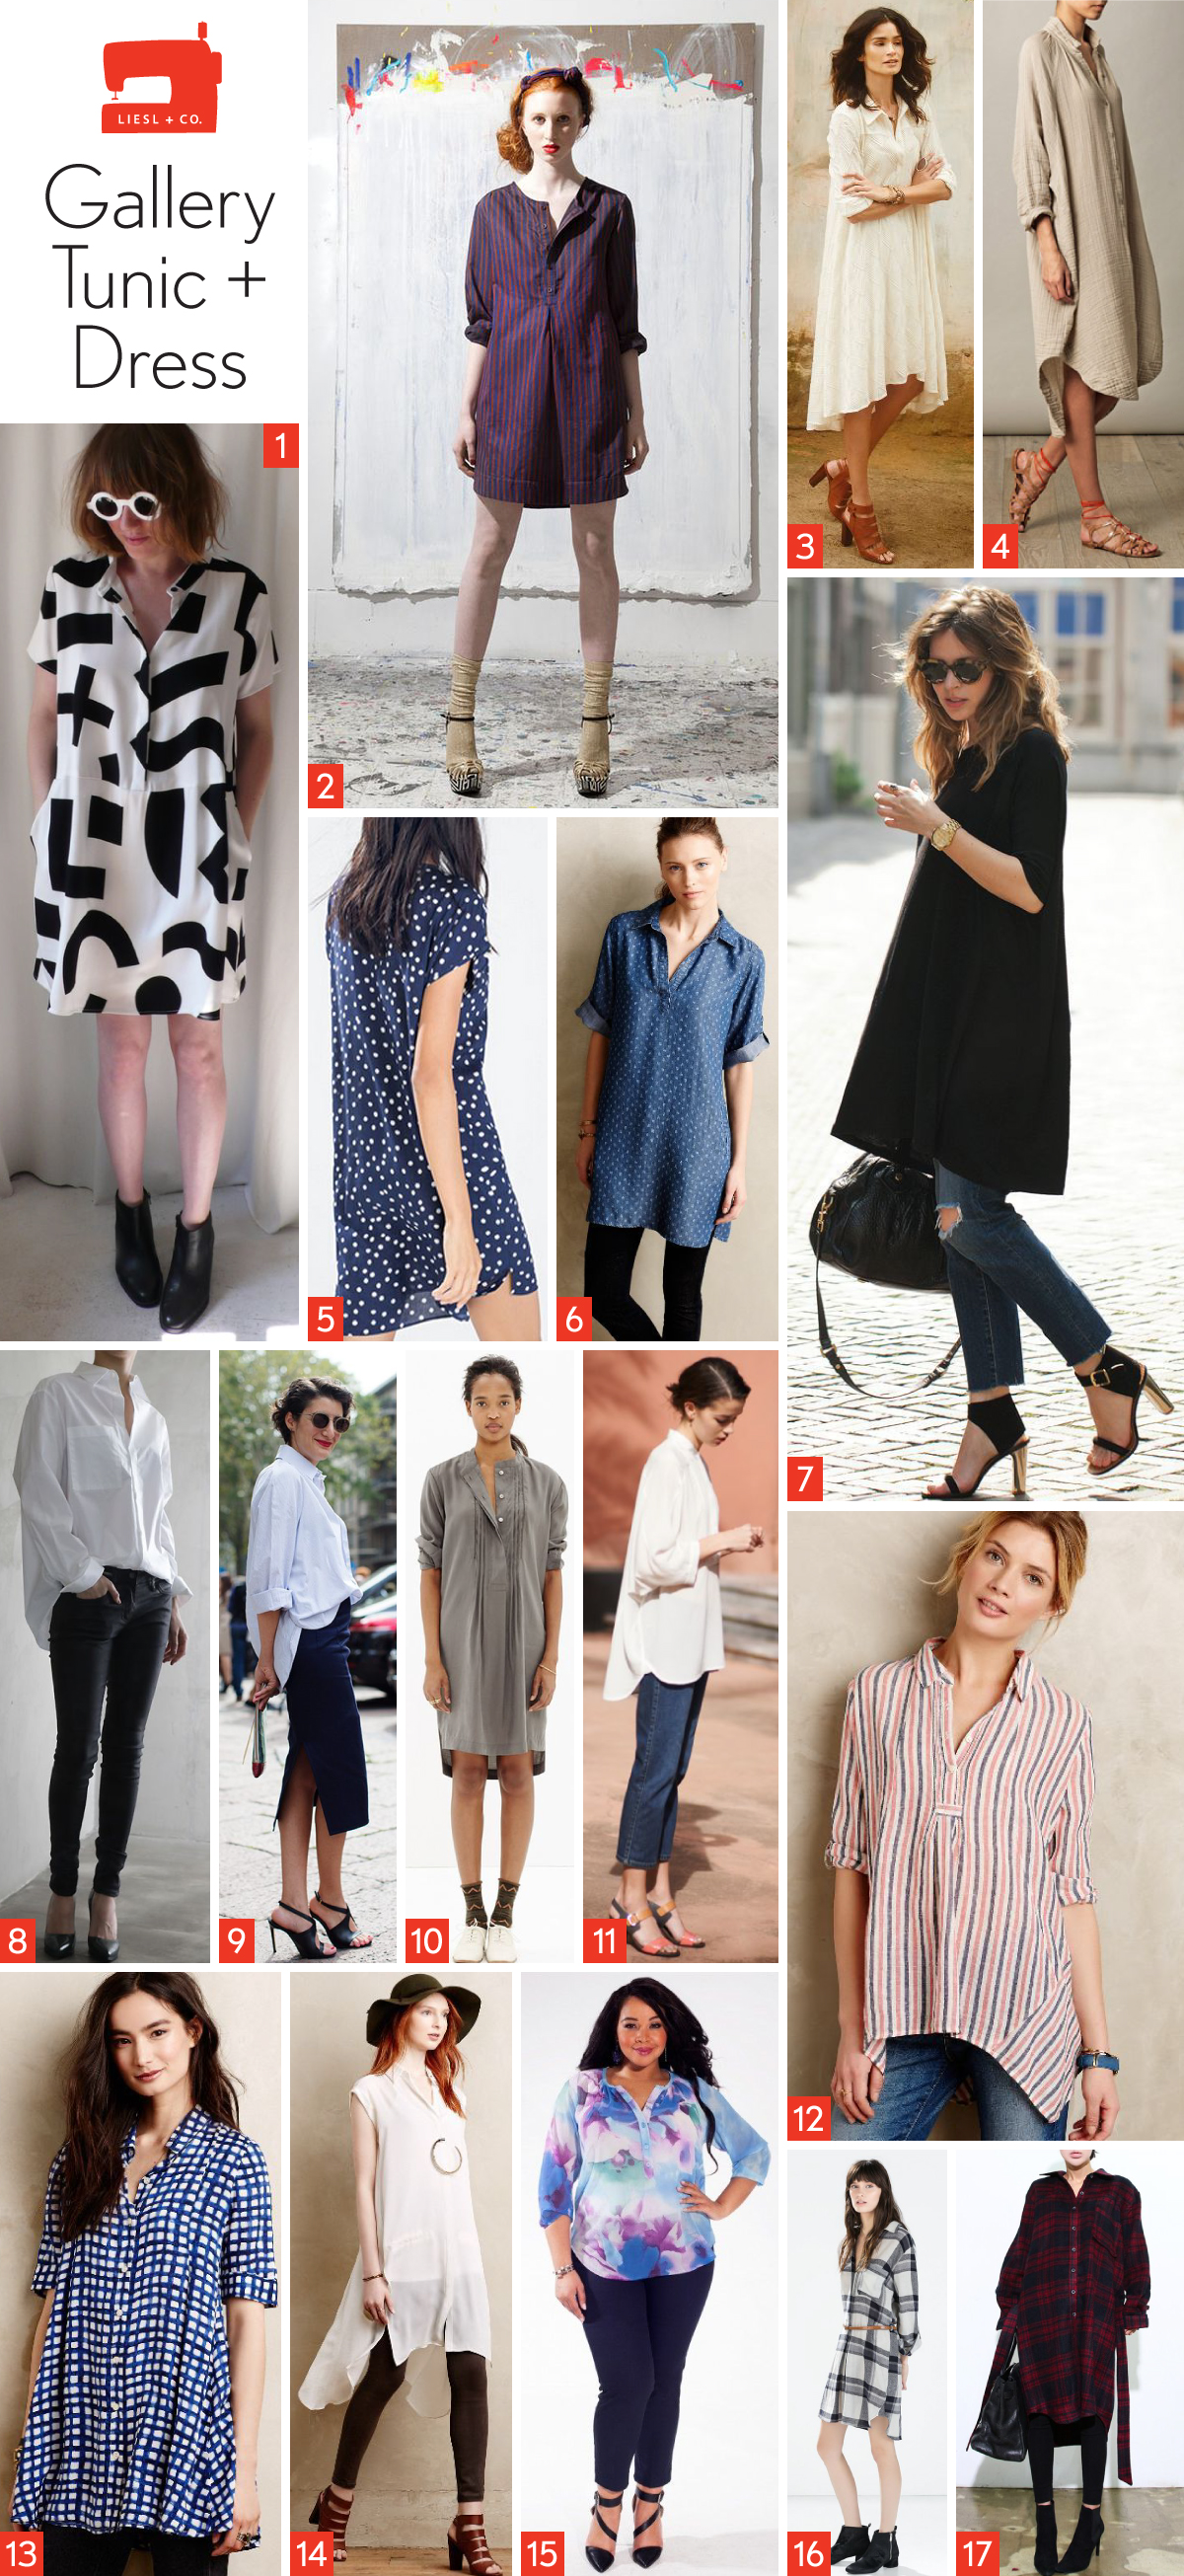 Fabric and Styling Inspiration for the Gallery Tunic and Dress